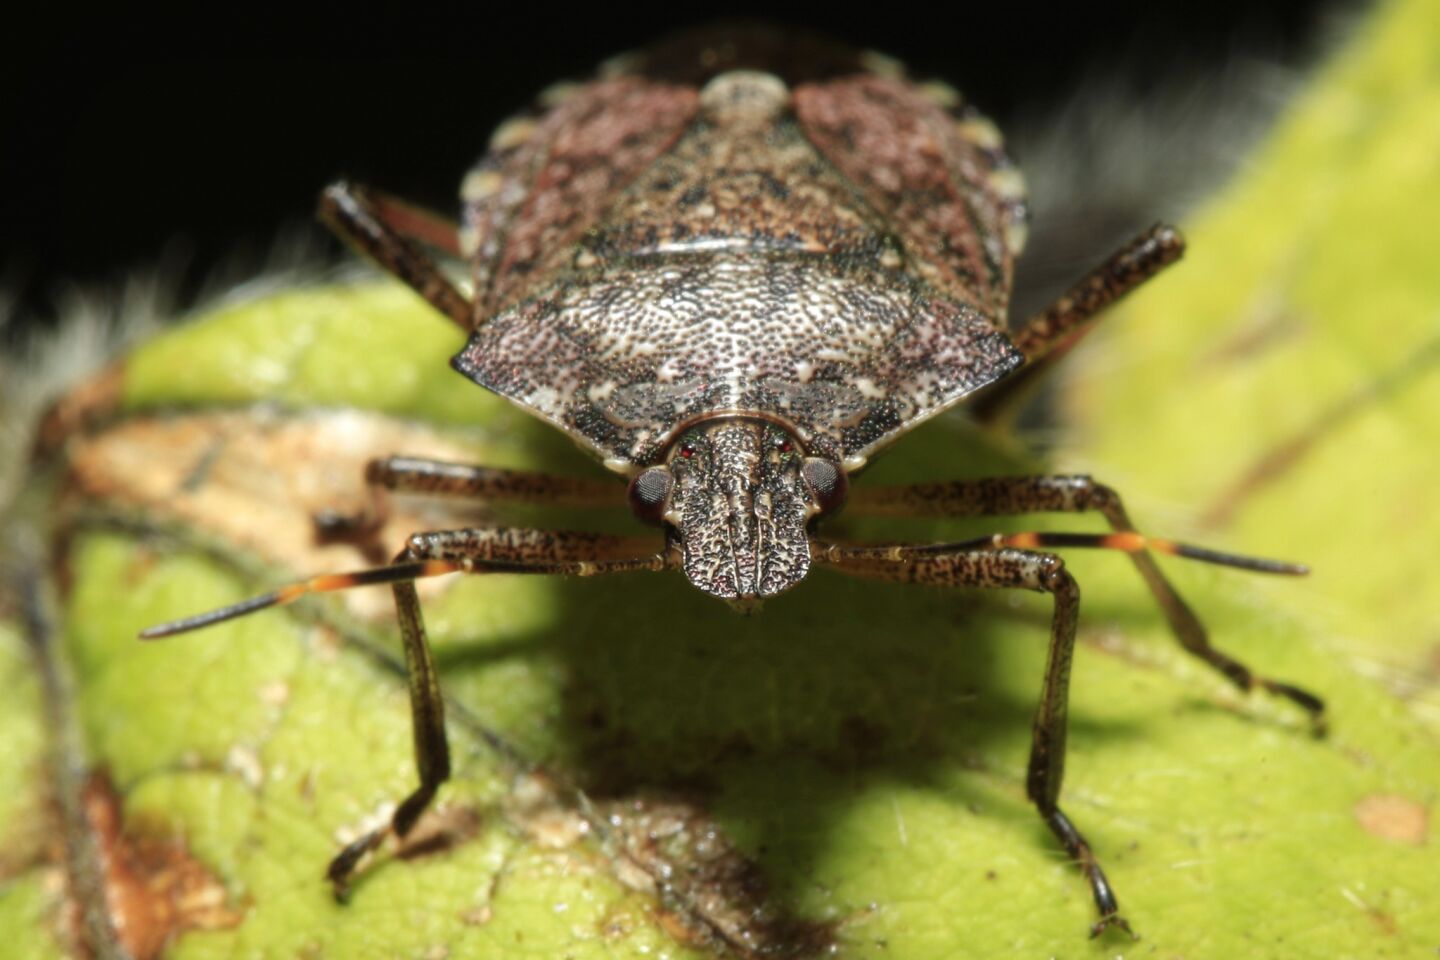 A brown marmorated stink bug. The bug caused millions of dollars in damages to crops in the mid-Atlantic region in 2011.